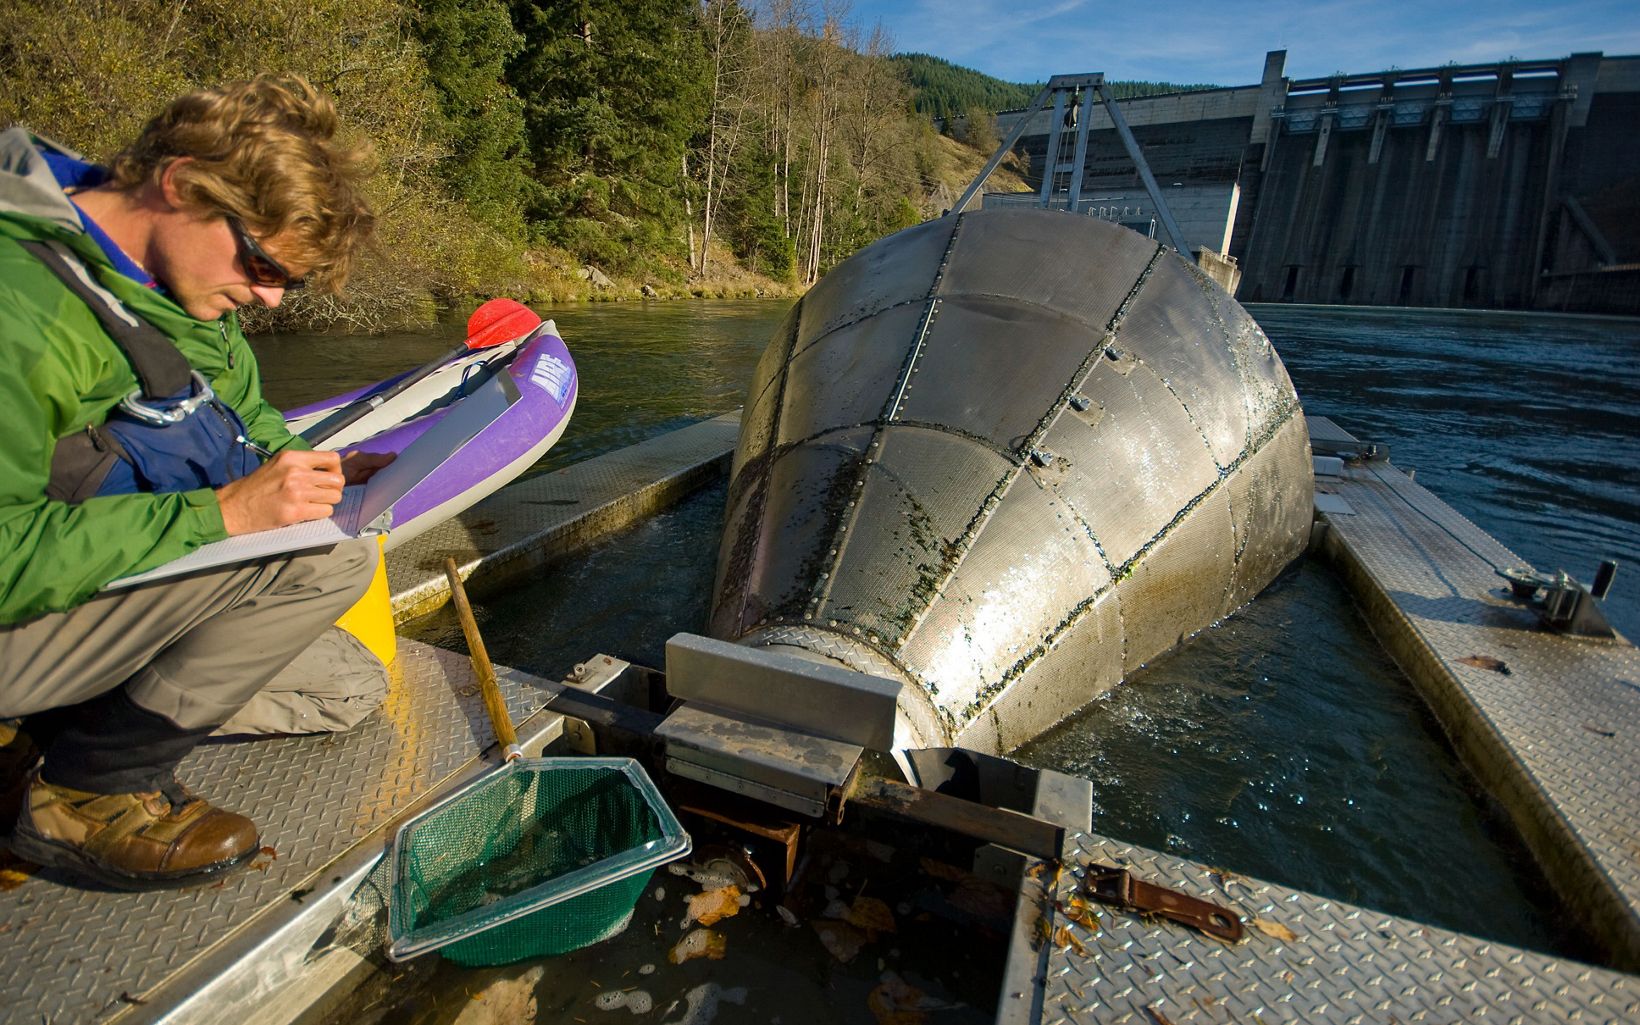 Doug Garletts, a fisheries biologist with the U.S. Army Corps of Engineers, inspects a fish trap below Lookout Point Dam located at Willamette River at Lowell, Oregon .